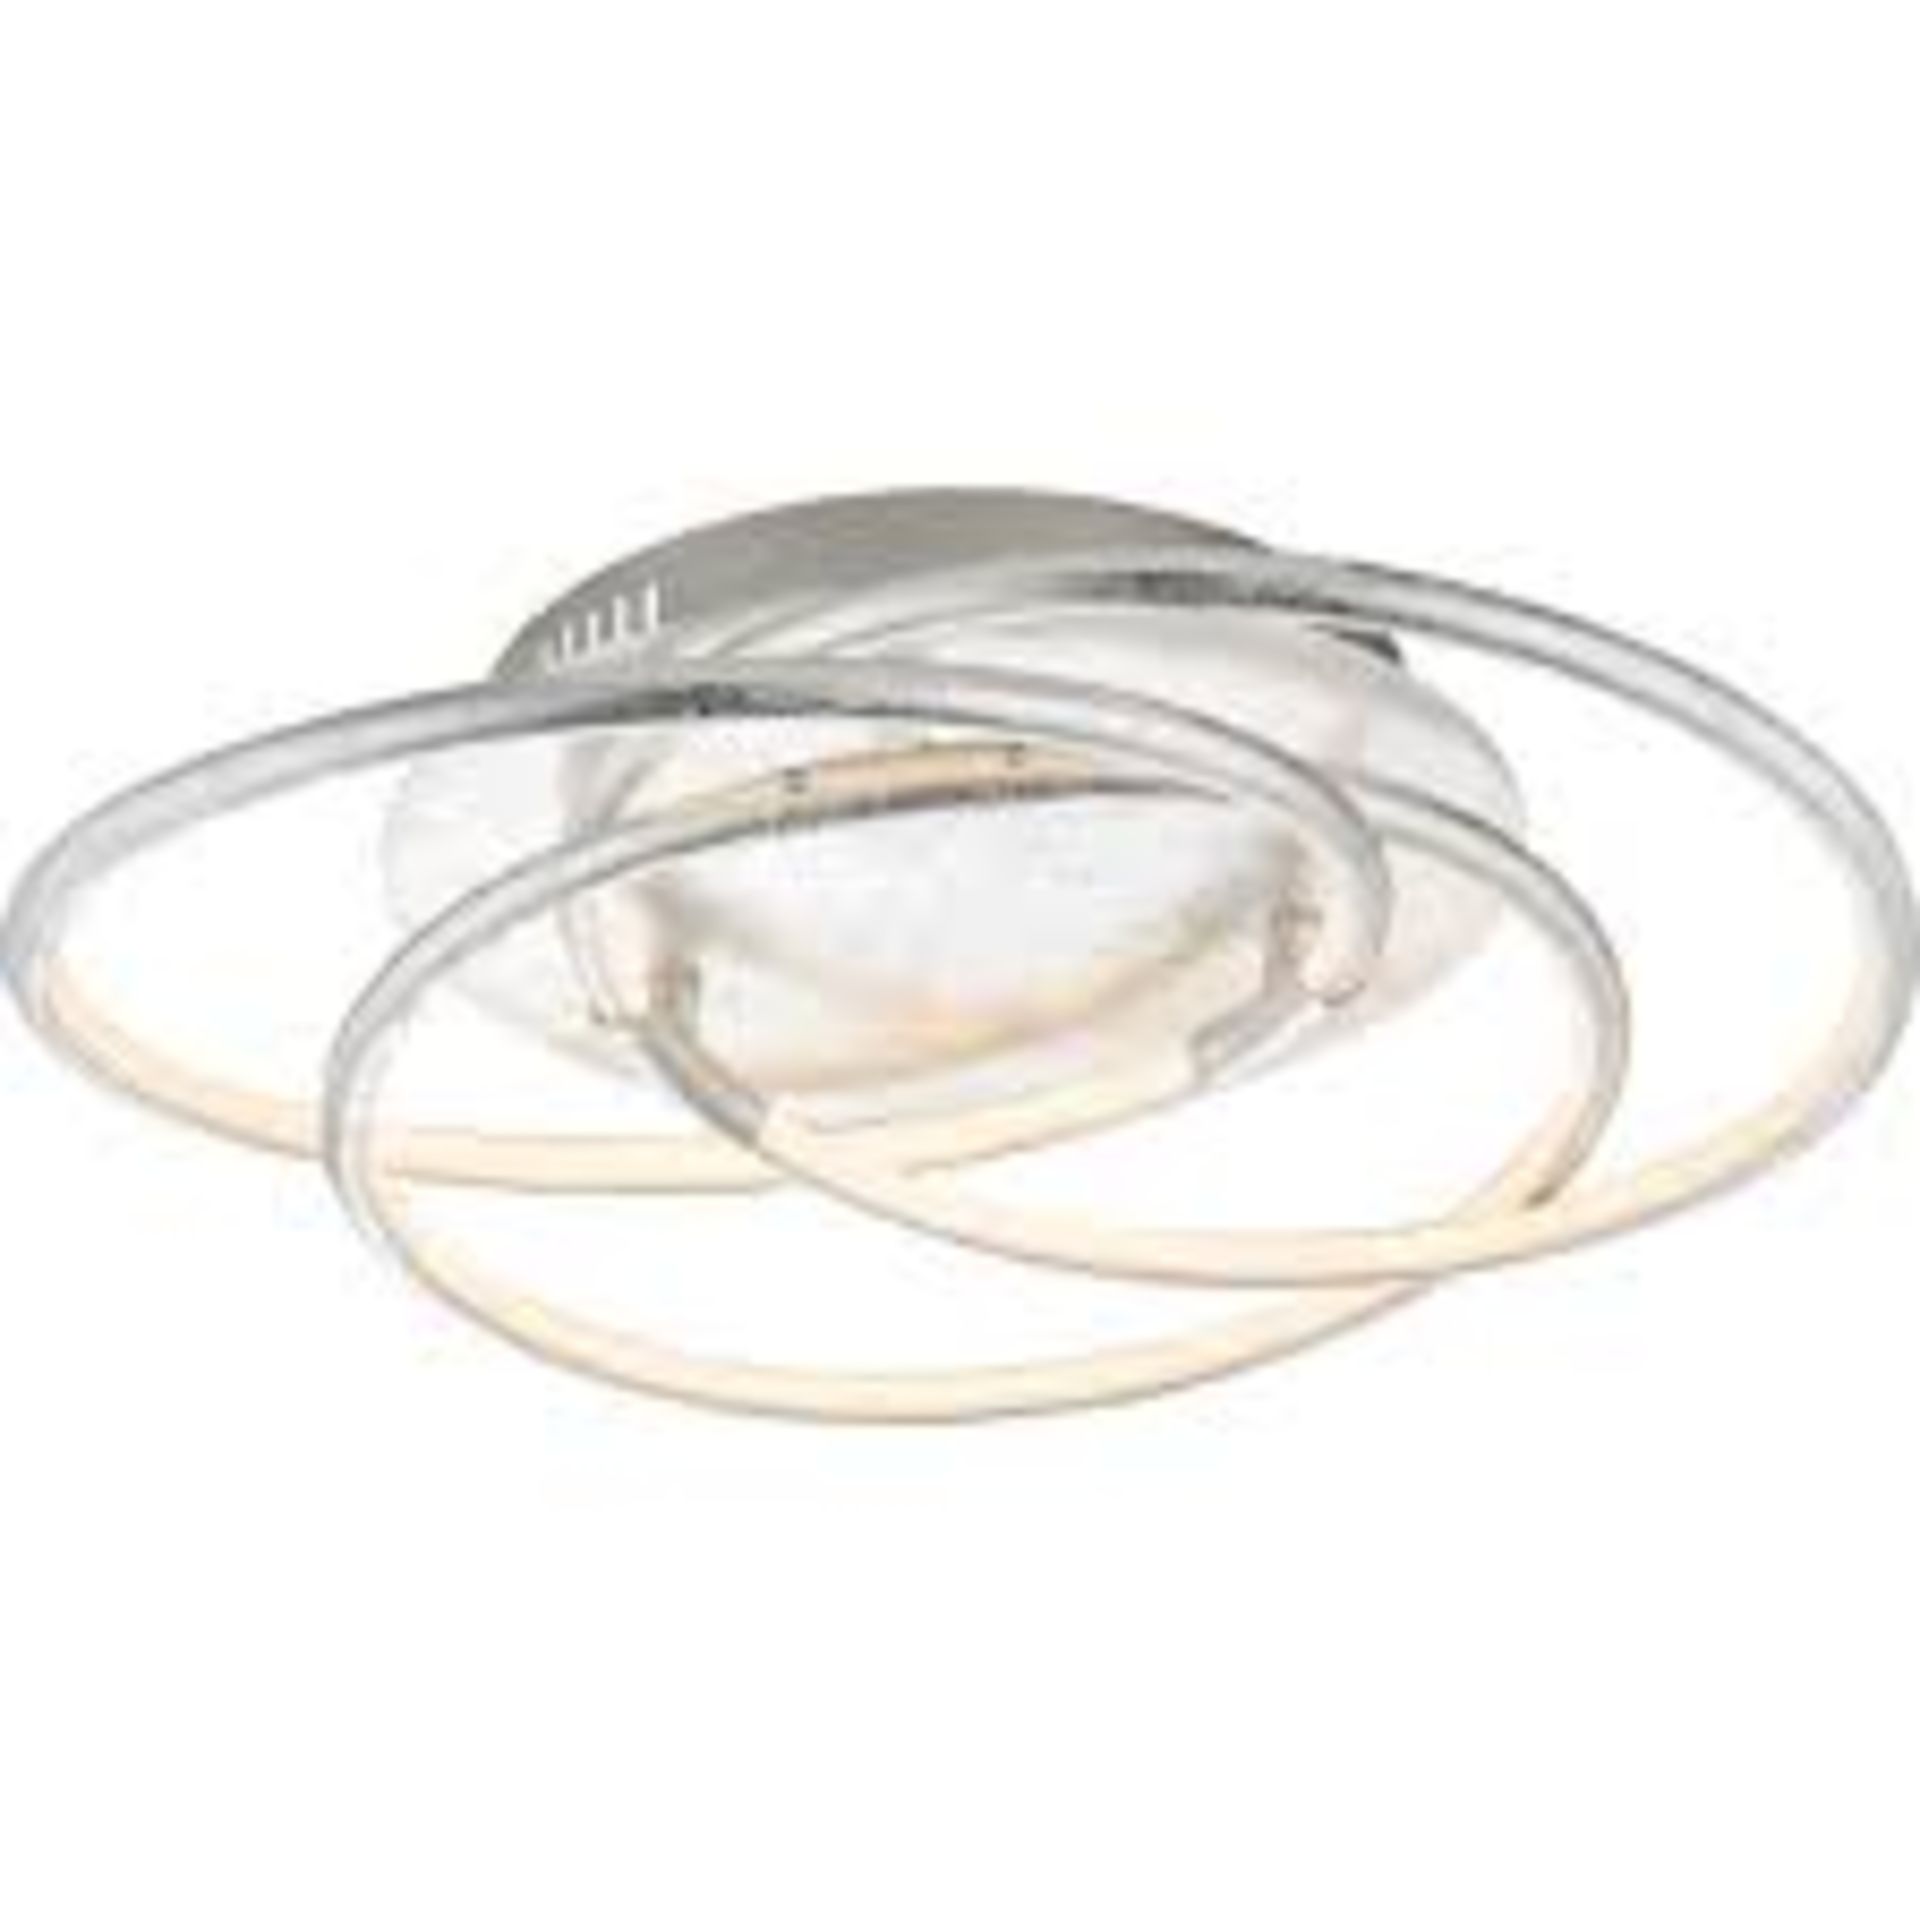 Boxed Dinah LED Flush Mount Ceiling Light RRP £70 (16875) (Appraisals Are Available Upon Request) (